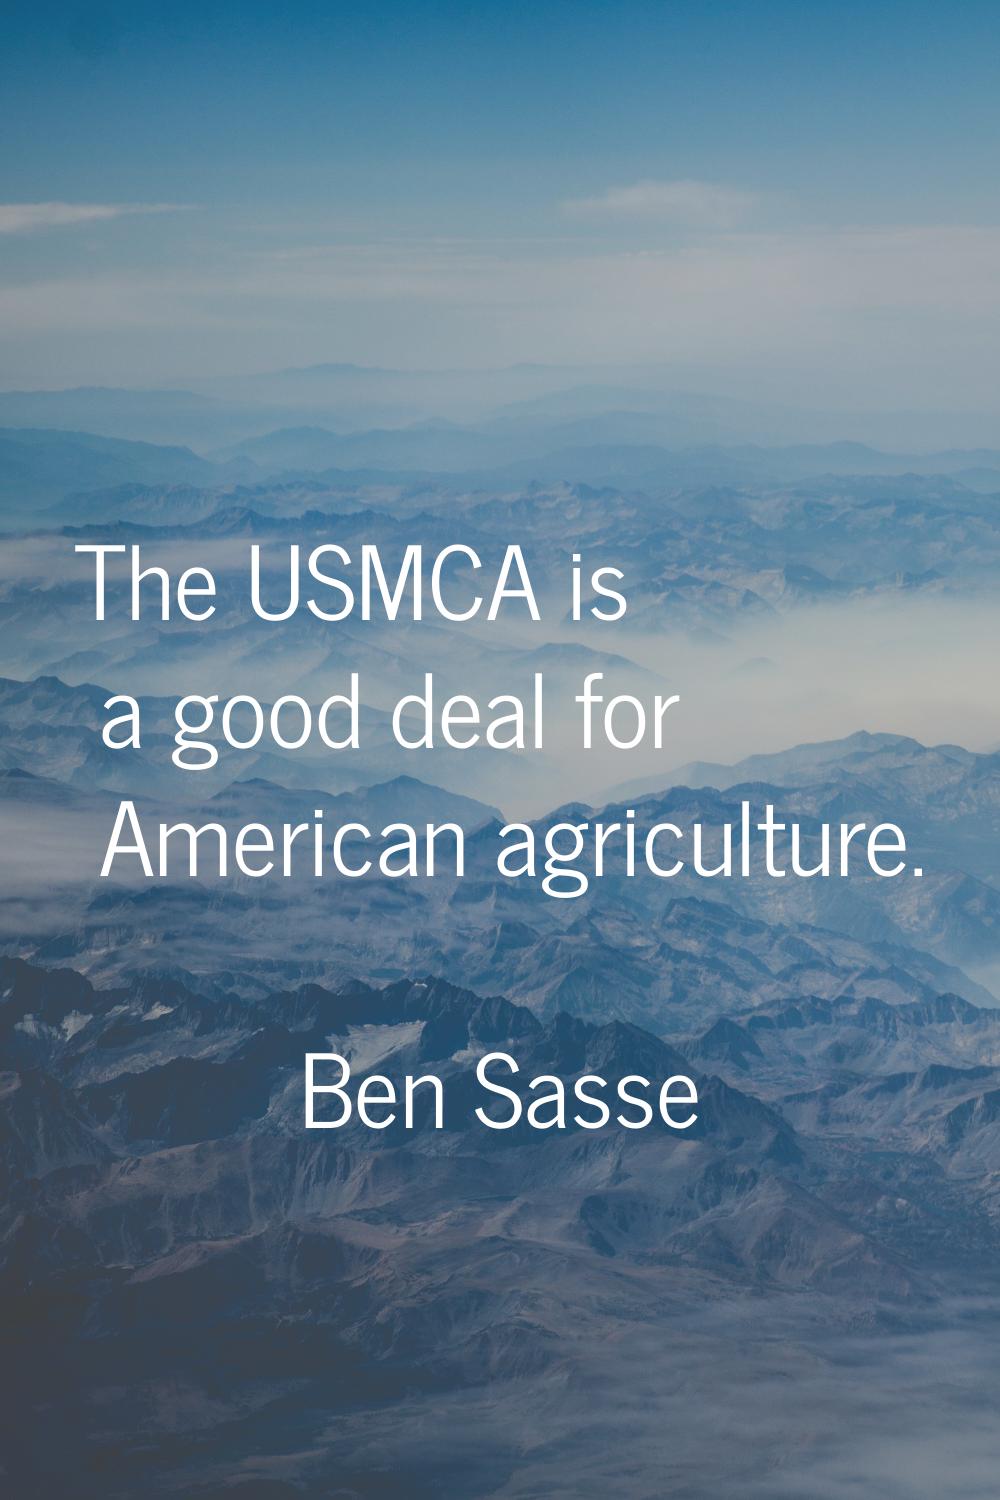 The USMCA is a good deal for American agriculture.